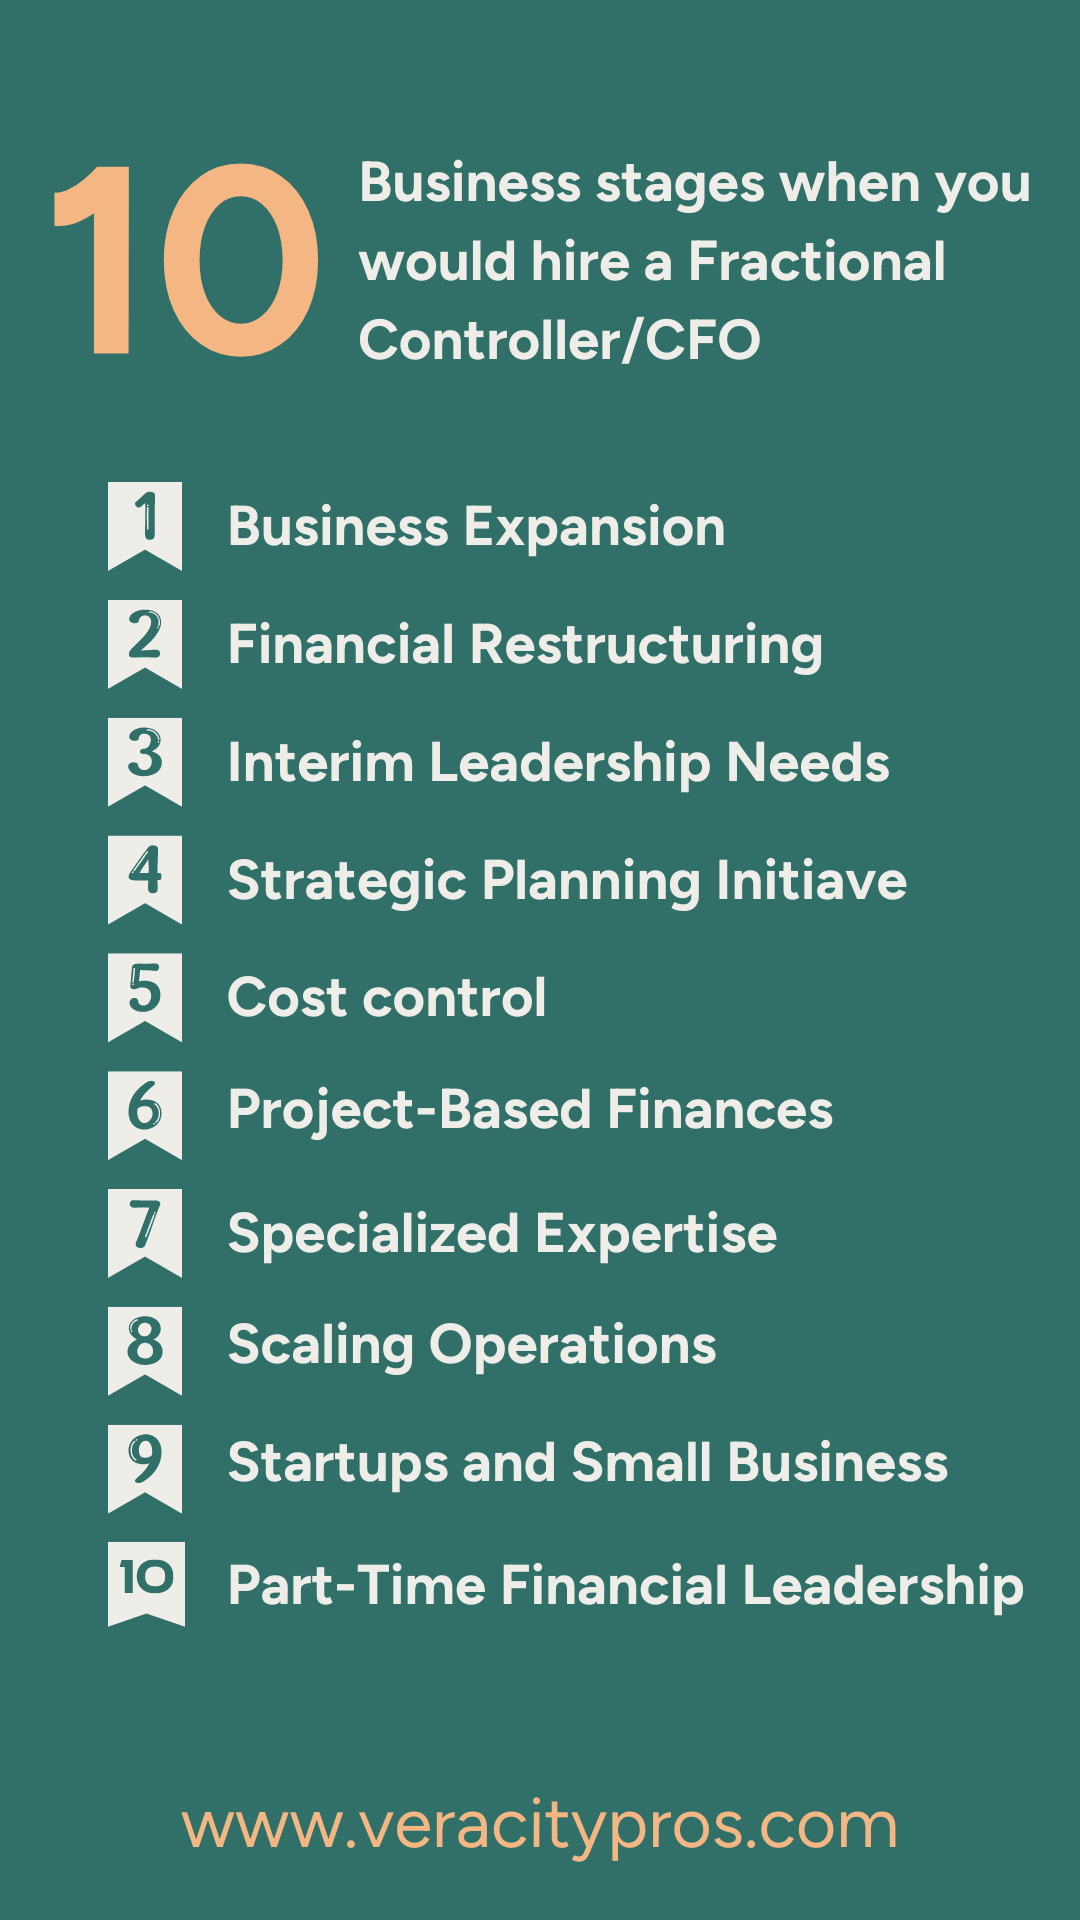 10 Business stages when you would hire a Fractional Controller & CFO